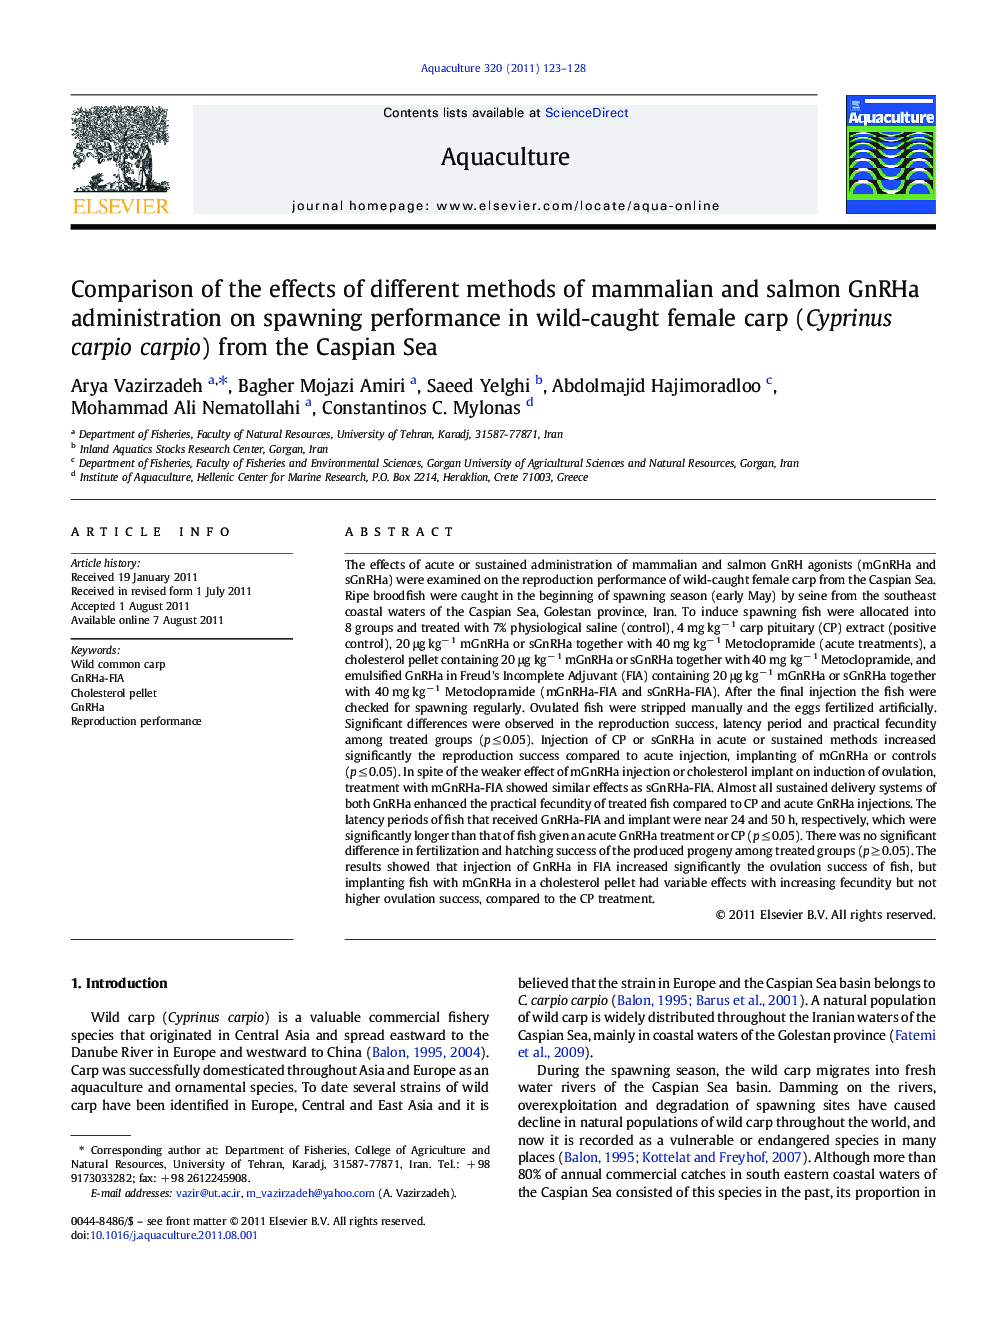 Comparison of the effects of different methods of mammalian and salmon GnRHa administration on spawning performance in wild-caught female carp (Cyprinus carpio carpio) from the Caspian Sea